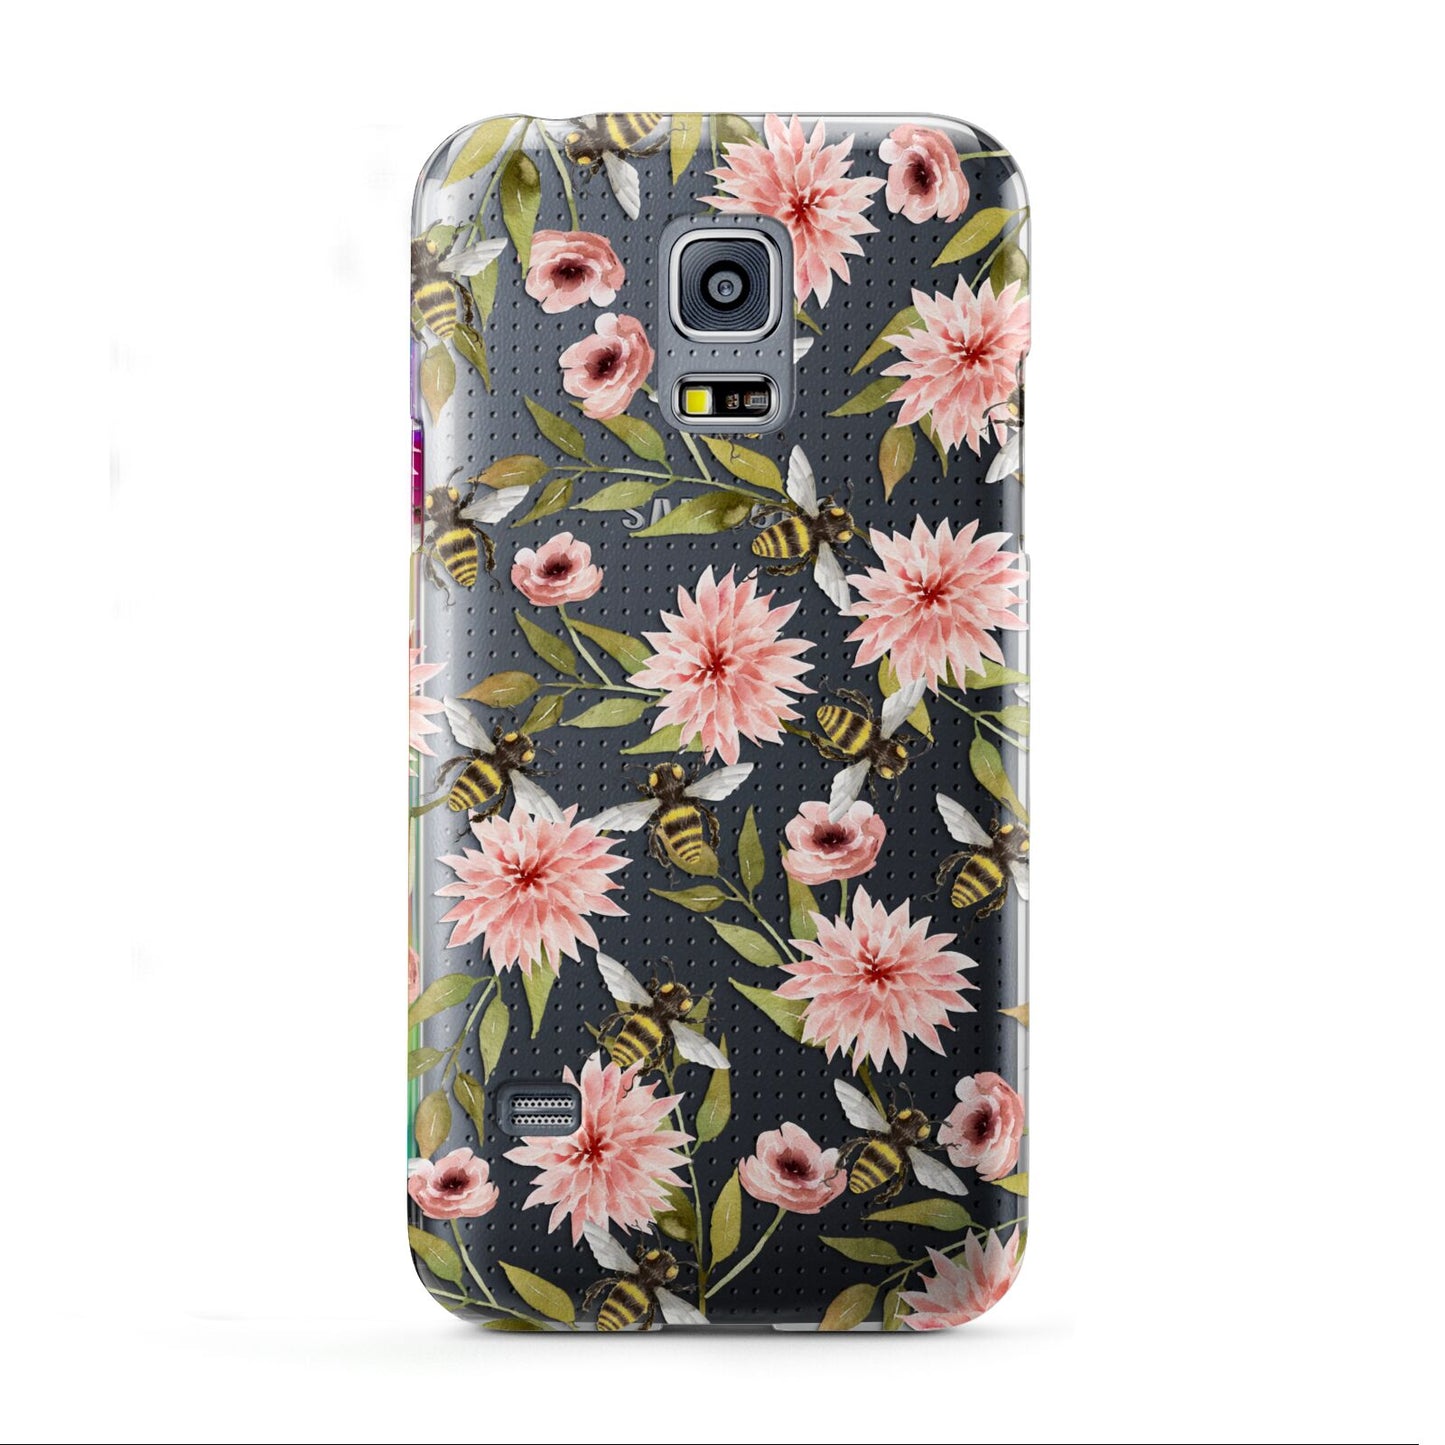 Pink Flowers and Bees Samsung Galaxy S5 Mini Case